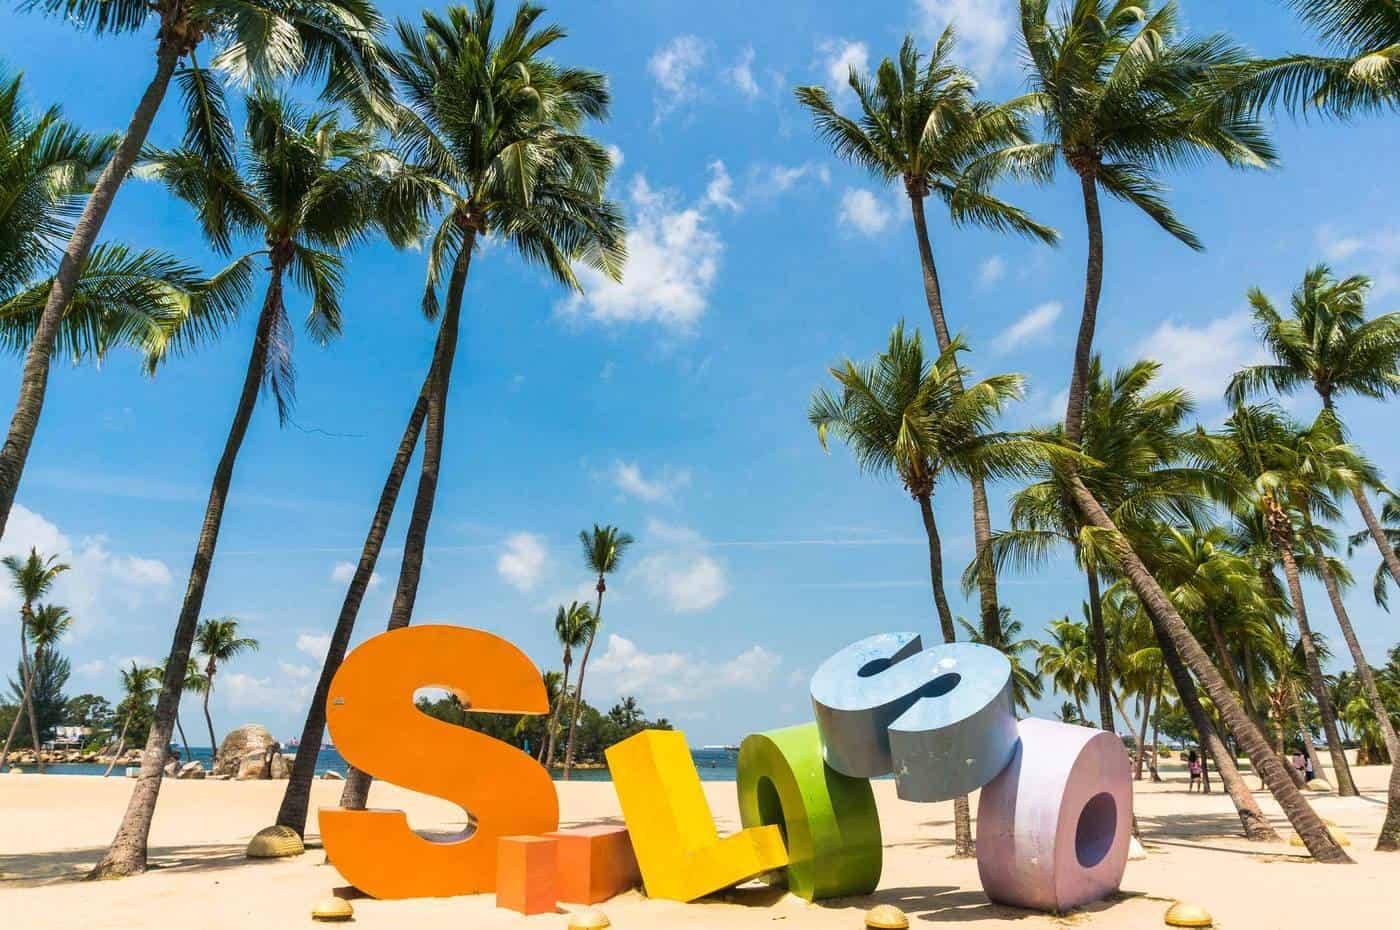 SENTOSA ISLAND – 5 THINGS TO DO IN THE STATE OF FUN